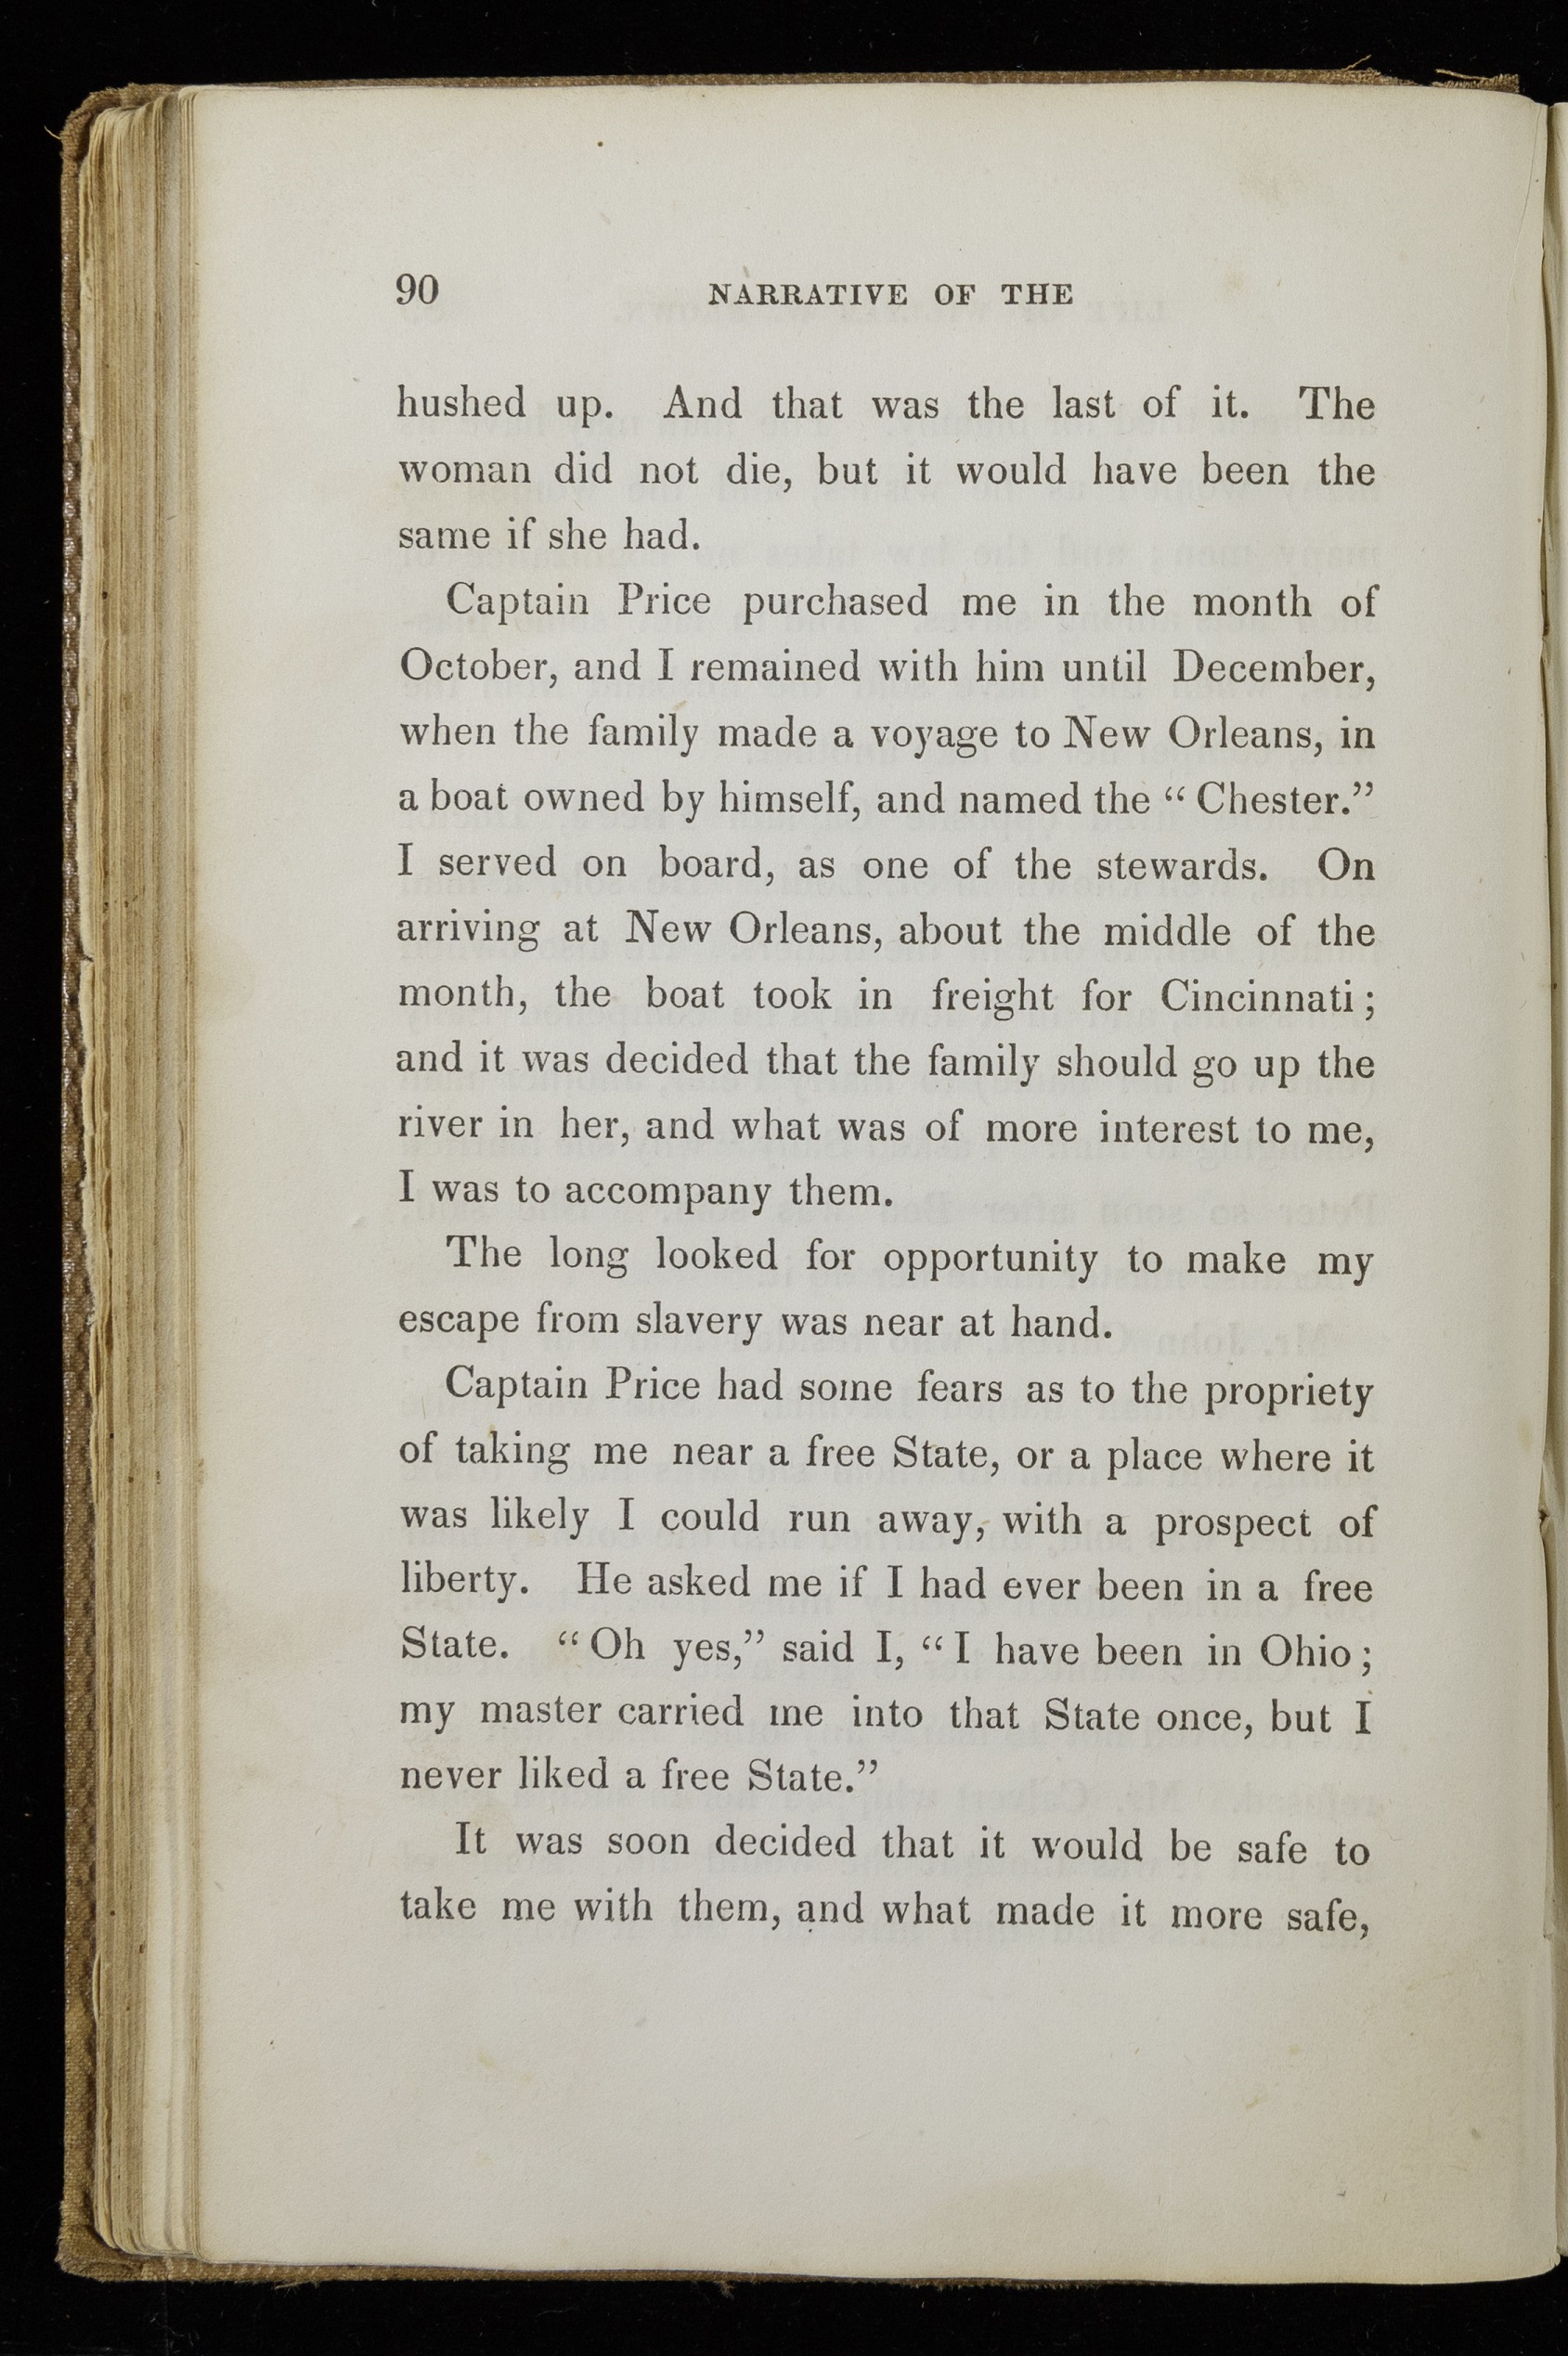 Single page of printed text. Text reads, "Captain Price purchased me in the month of October, and I remained with him until December, when the family made a voyage to New Orleans, in a boat owned by himself, and named the 'Chester.' I served on board, as one of the stewards. On arriving at New Orleans, about the middle of the month, the boat took in freight for Cincinnati; and it was decided that the family should go up to the river in her, and what was of more interest to me, I was to accompany them. The long looked for opportunity to make my escape from slavery was near at hand. Captain Price had some fears as to the propriety of taking me near a free State, or a place where it was likely I could run away, with a prospect of liberty. He asked me if I had ever been in a free State. 'Oh yes,' said I, 'I have been in Ohio; my master carried me into that State once, but I never liked a free State.' It was soon decided that it would be safe to take me with them, and what made it more safe,"